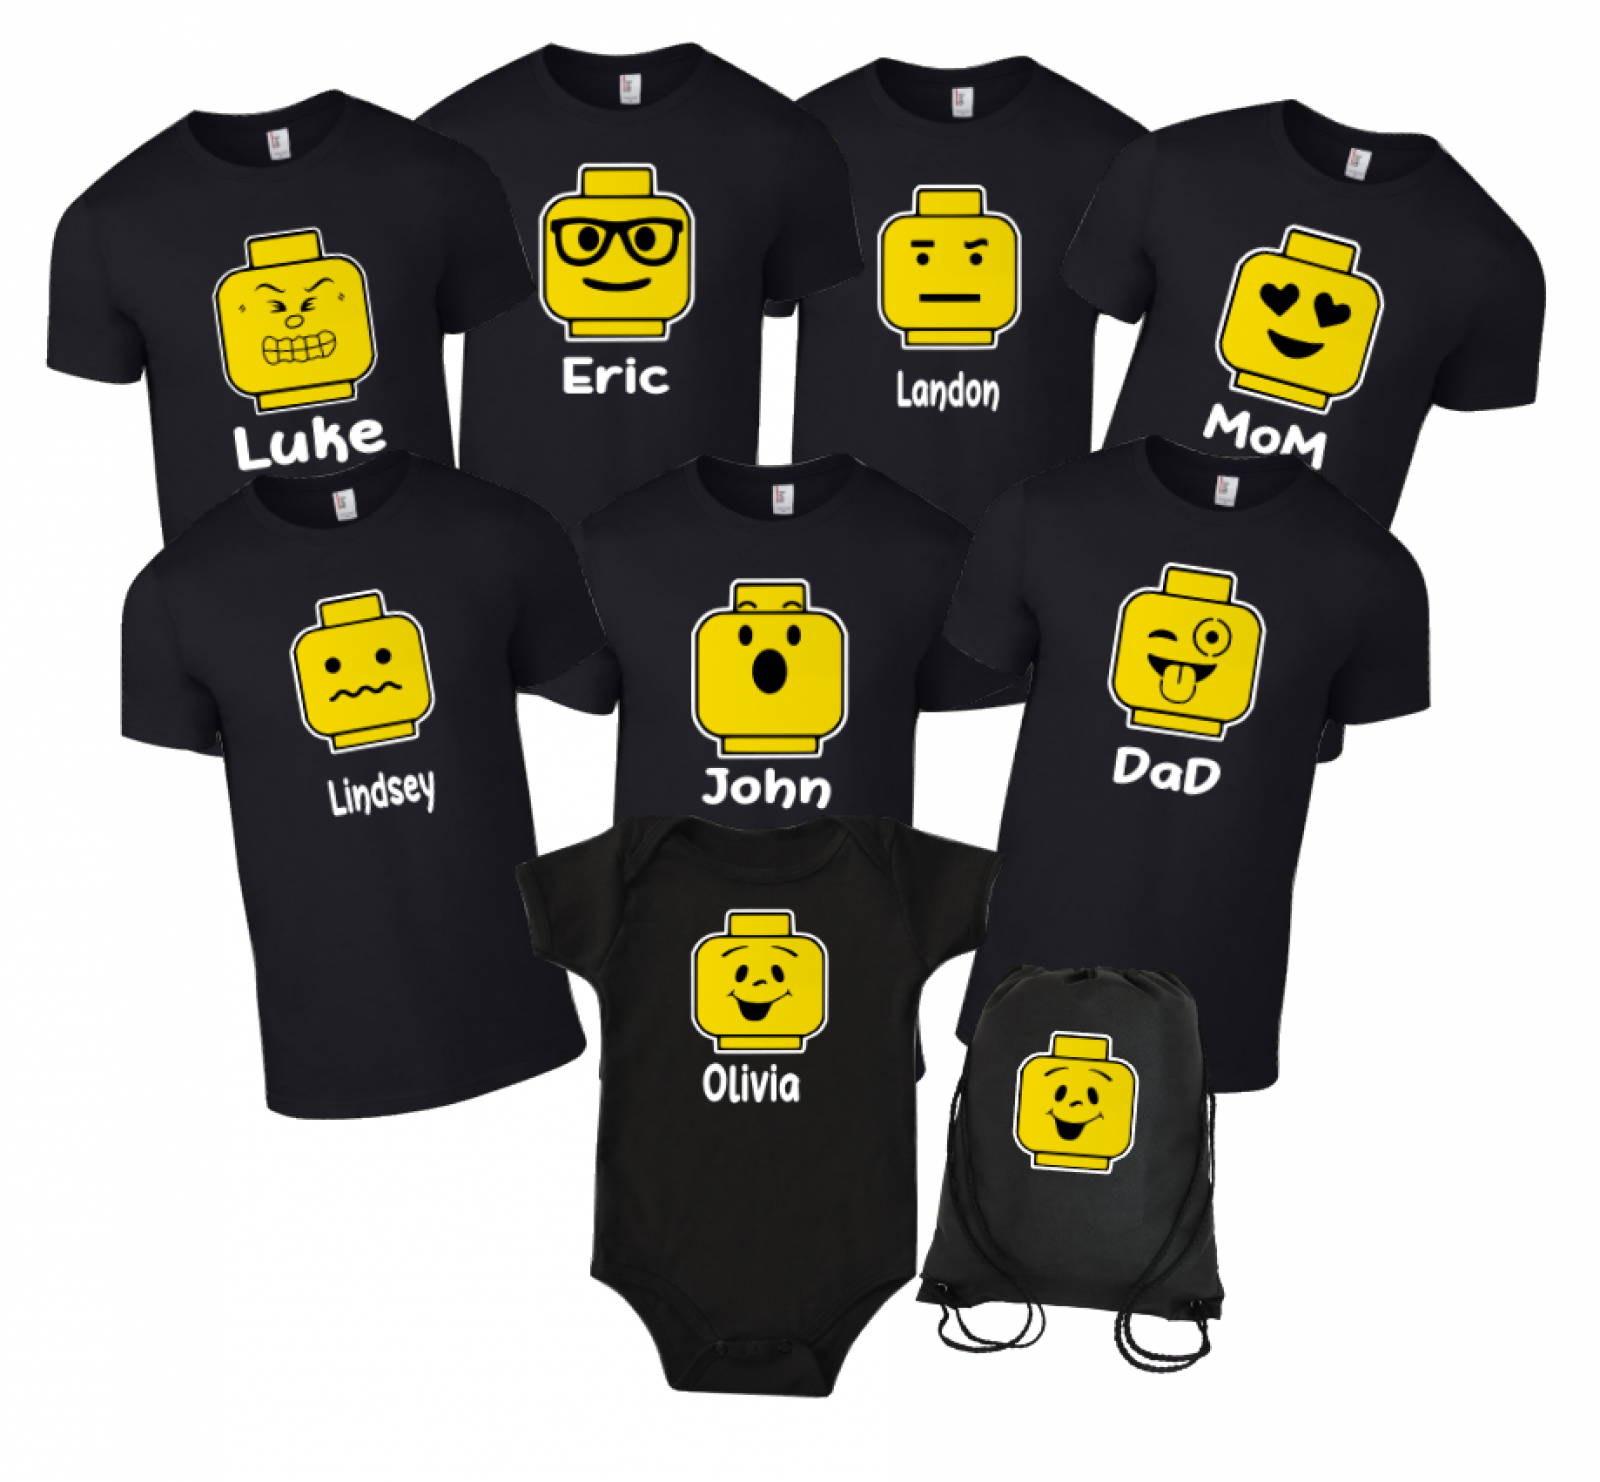 Personalized LEGO Shirts for the Family